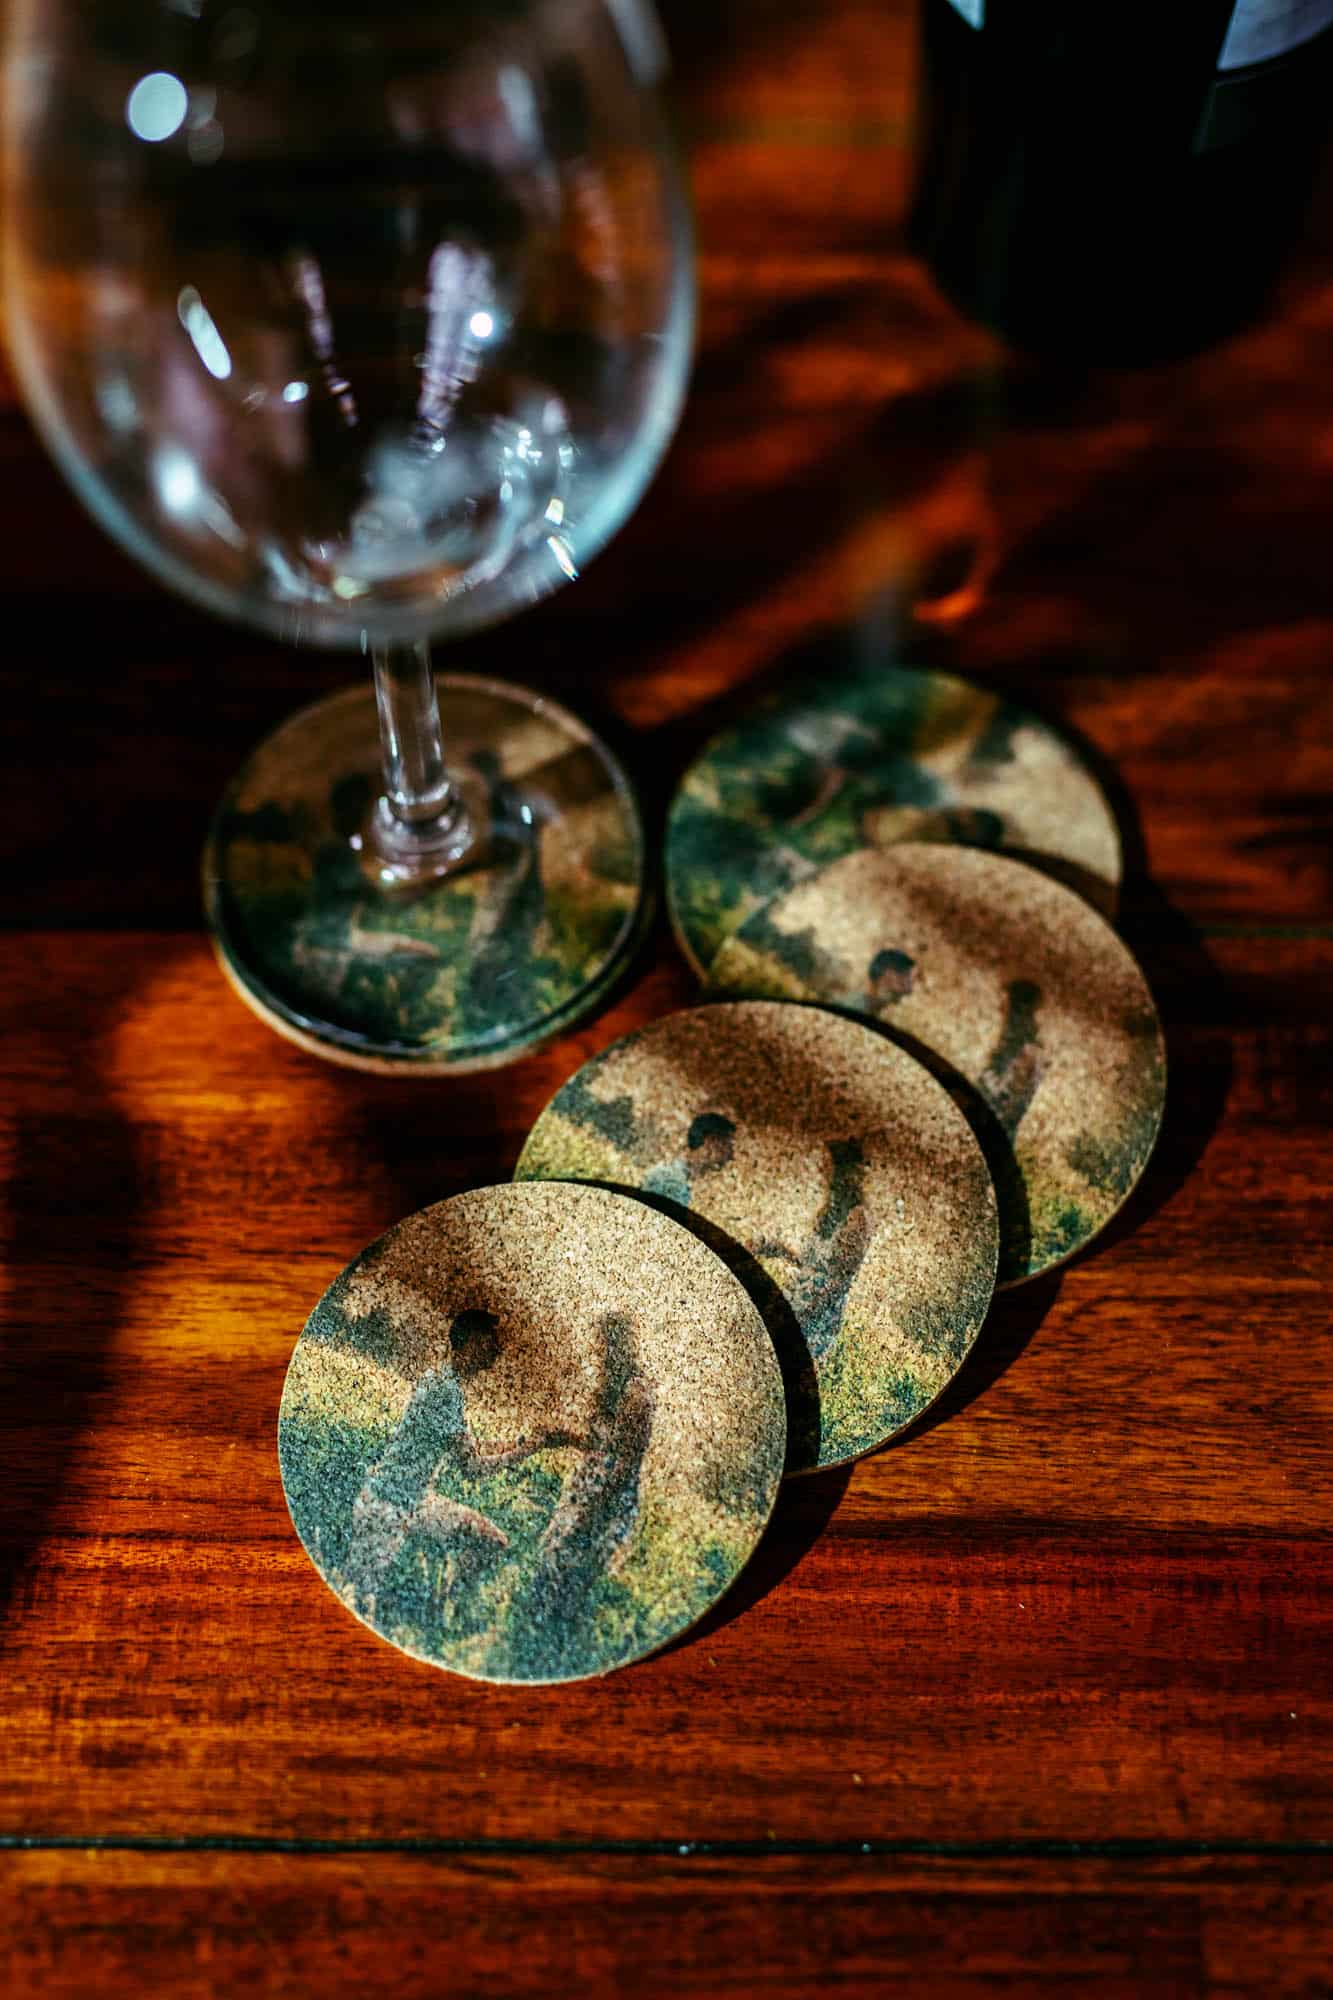 A perfect wedding day gift: four coasters with a picture of a couple sitting on a table.